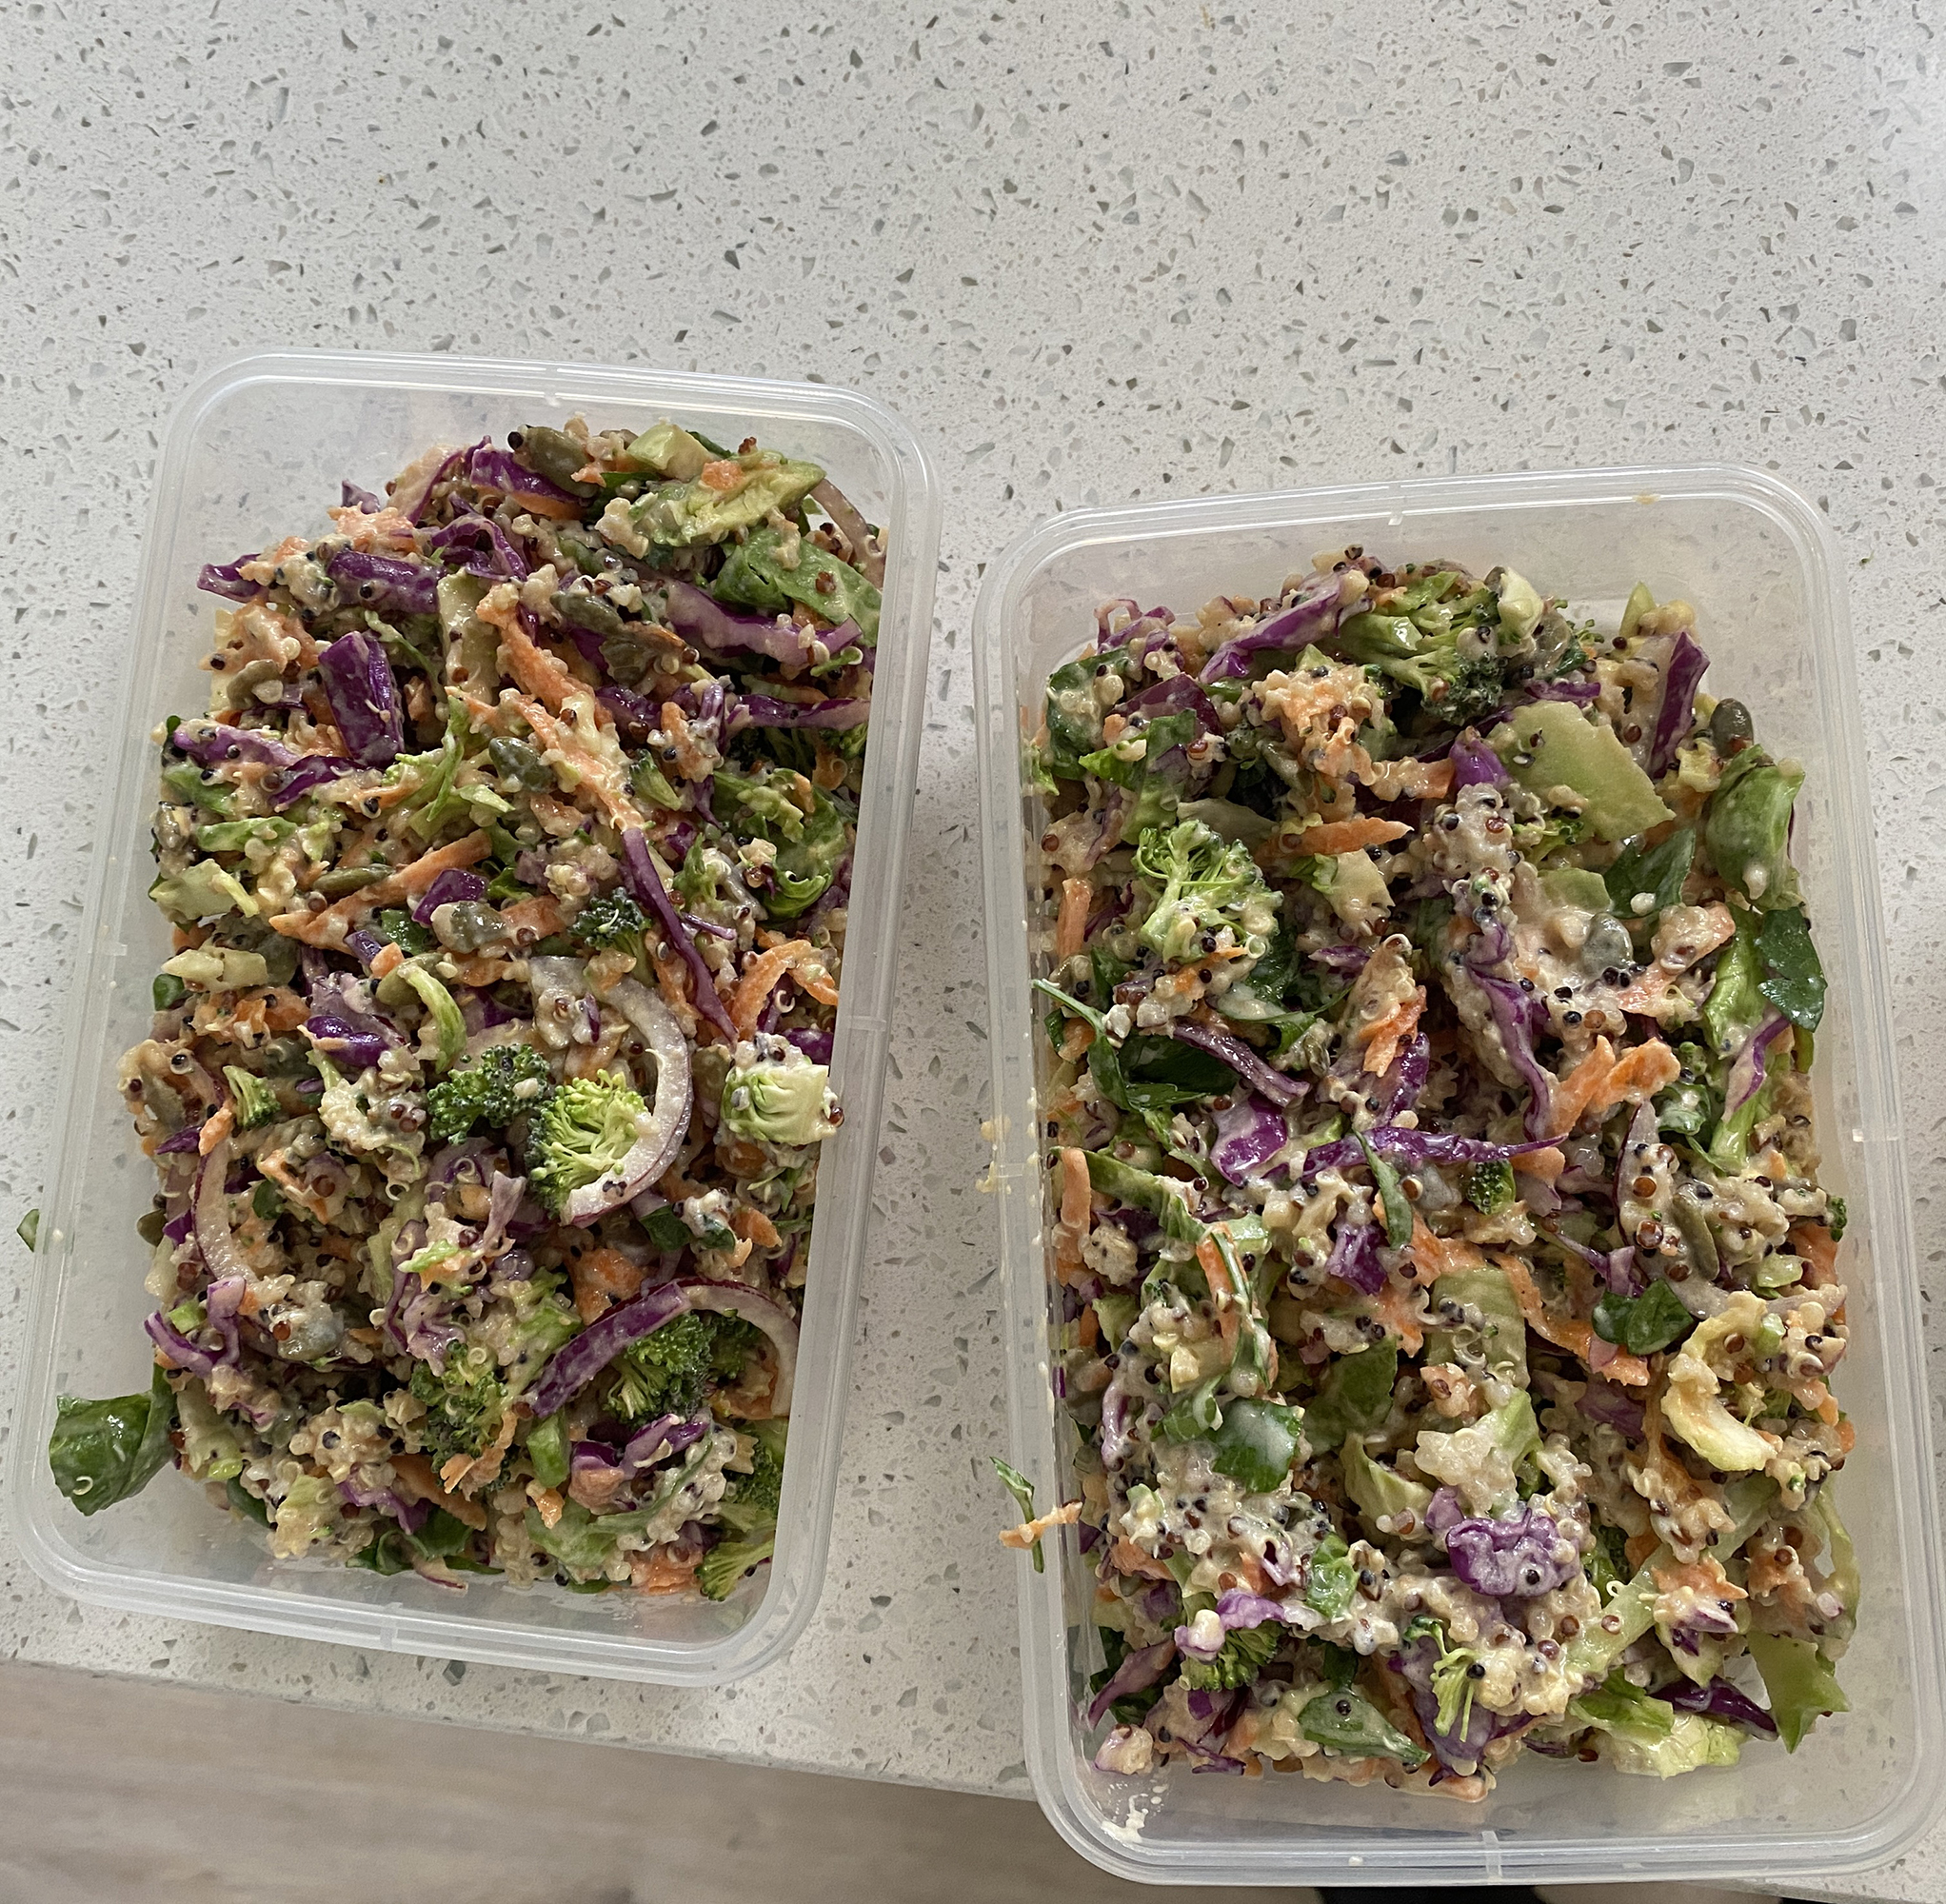 sunshine slaw with quinoa in take away containers for prep